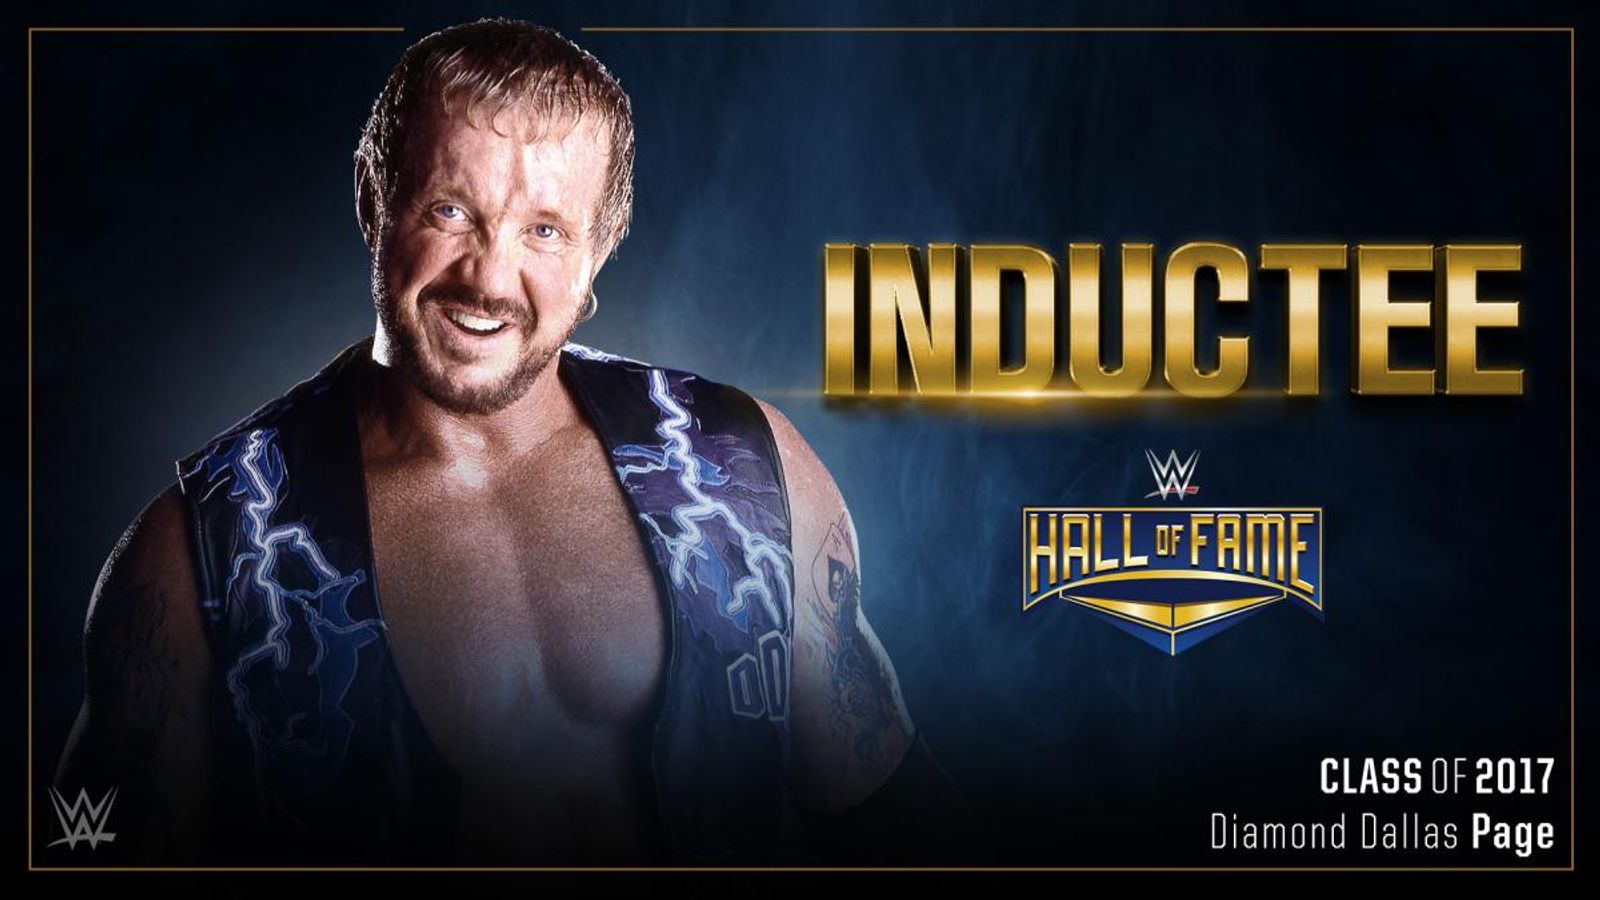 WWE Hall of Fame Diamond Dallas Page to be inducted in March WWE